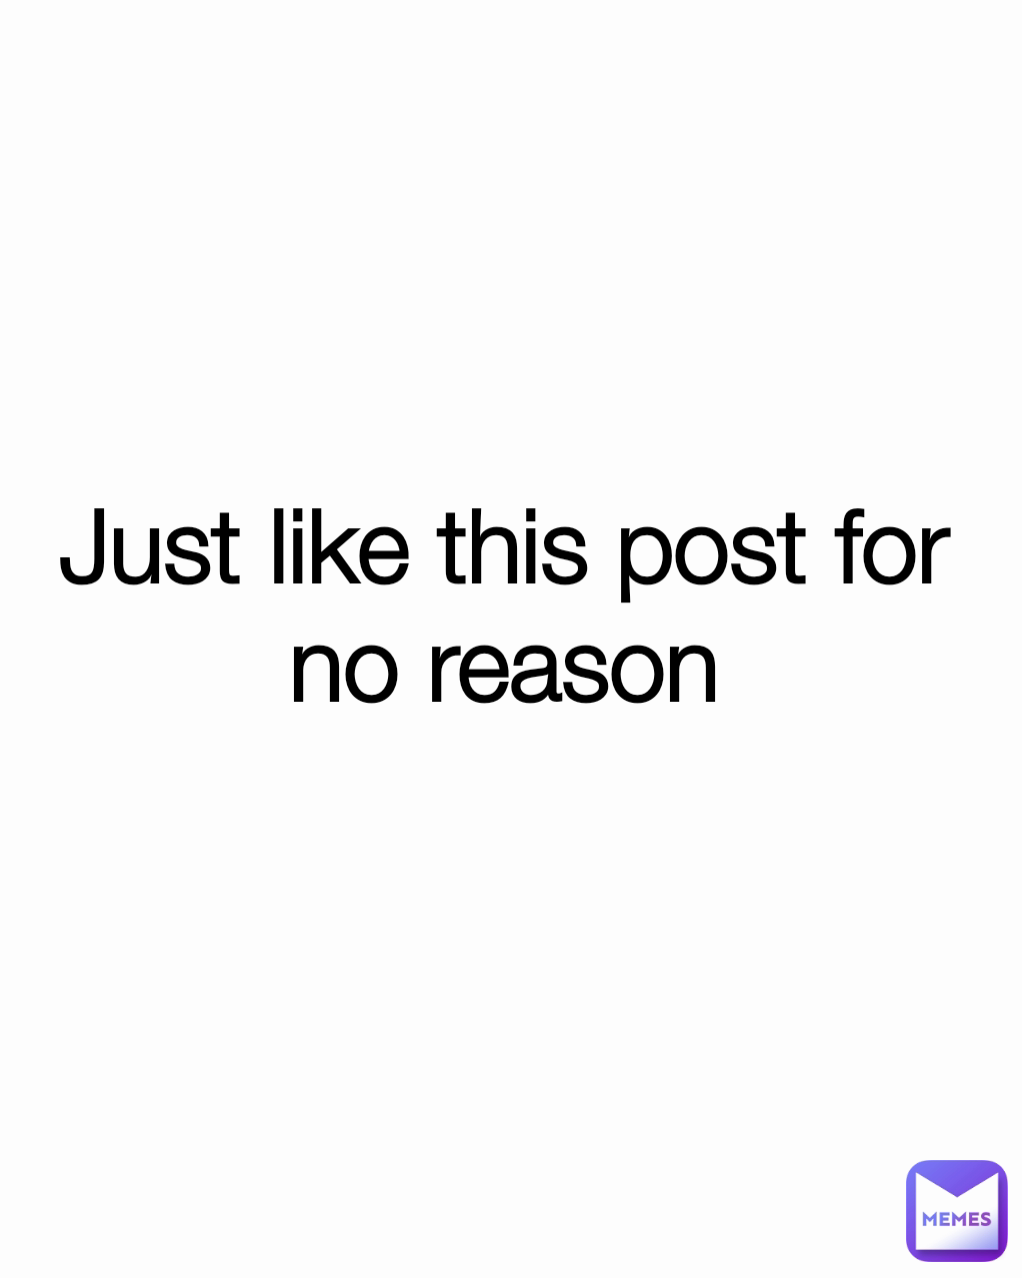 Just like this post for no reason